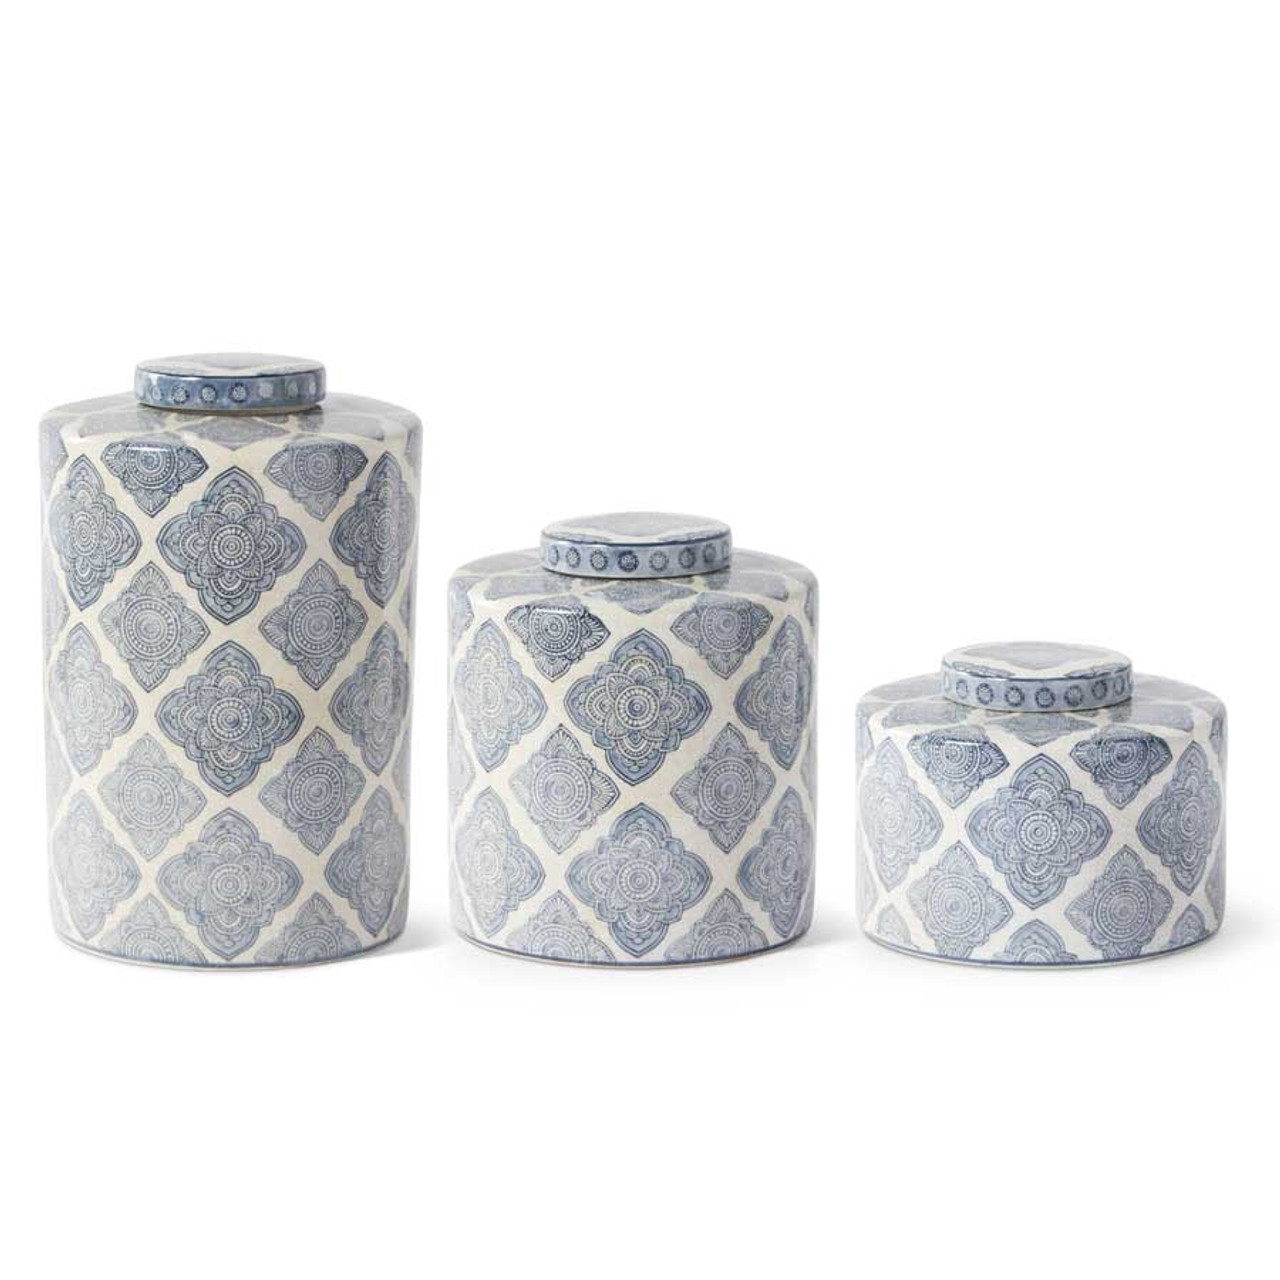 Set Of 3 Glass Containers With Decorative Metal Lids - K&K Interiors